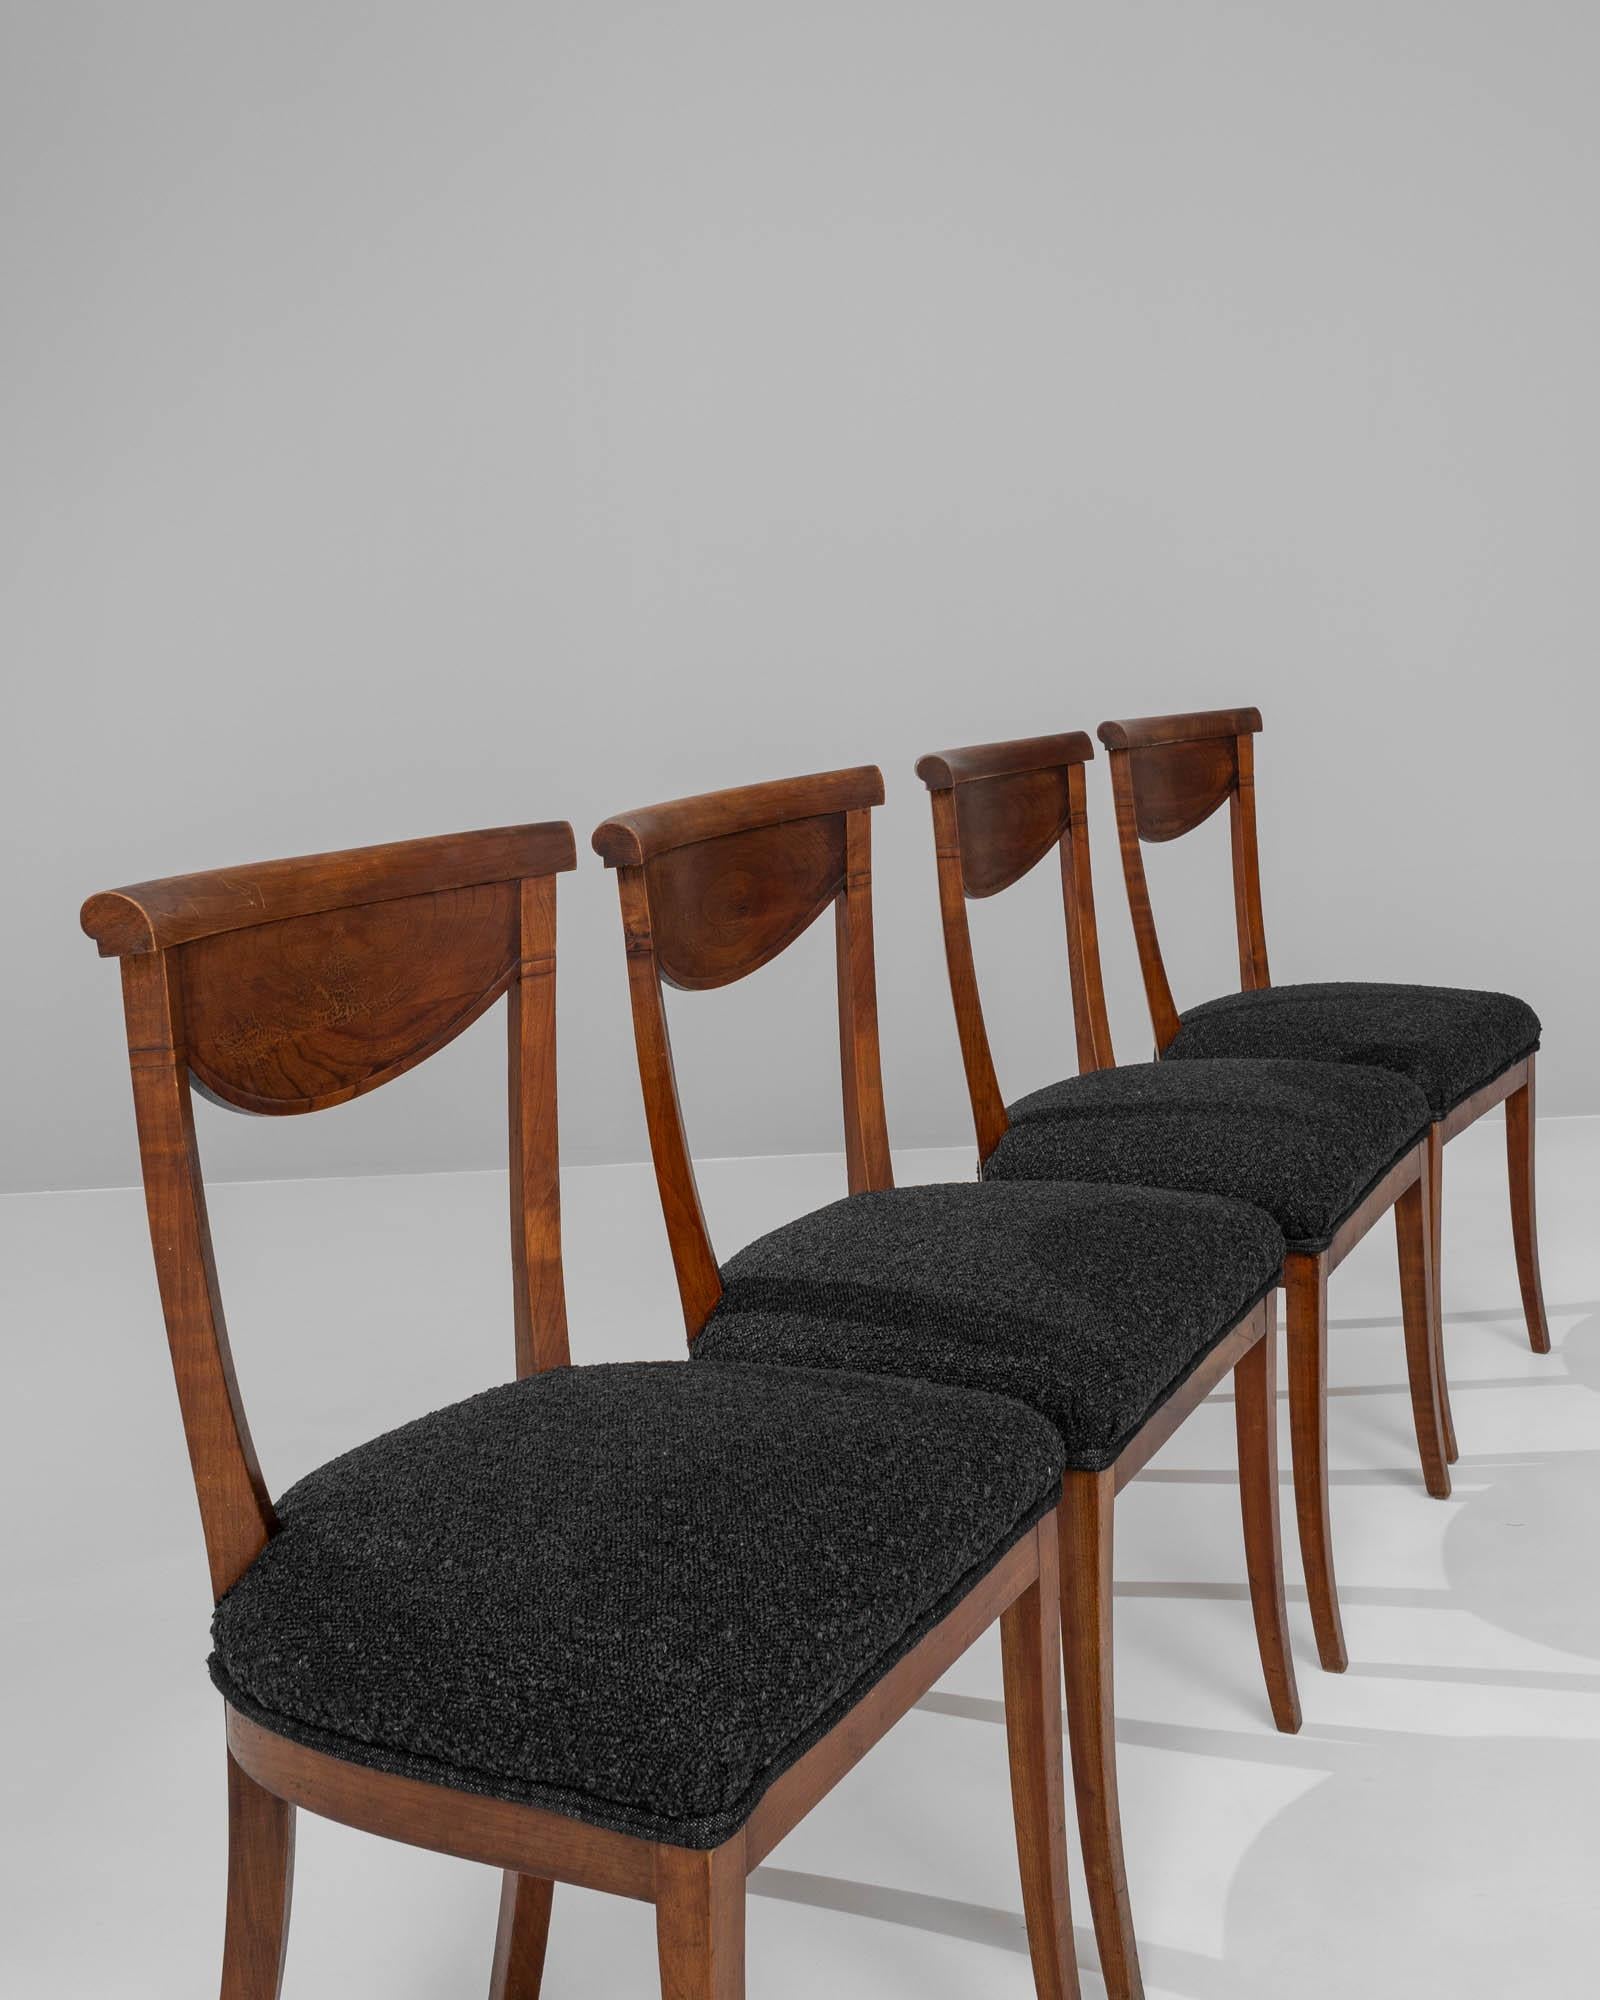 19th Century French Wooden Dining Chairs With Upholstered Seats, Set of 6 For Sale 3